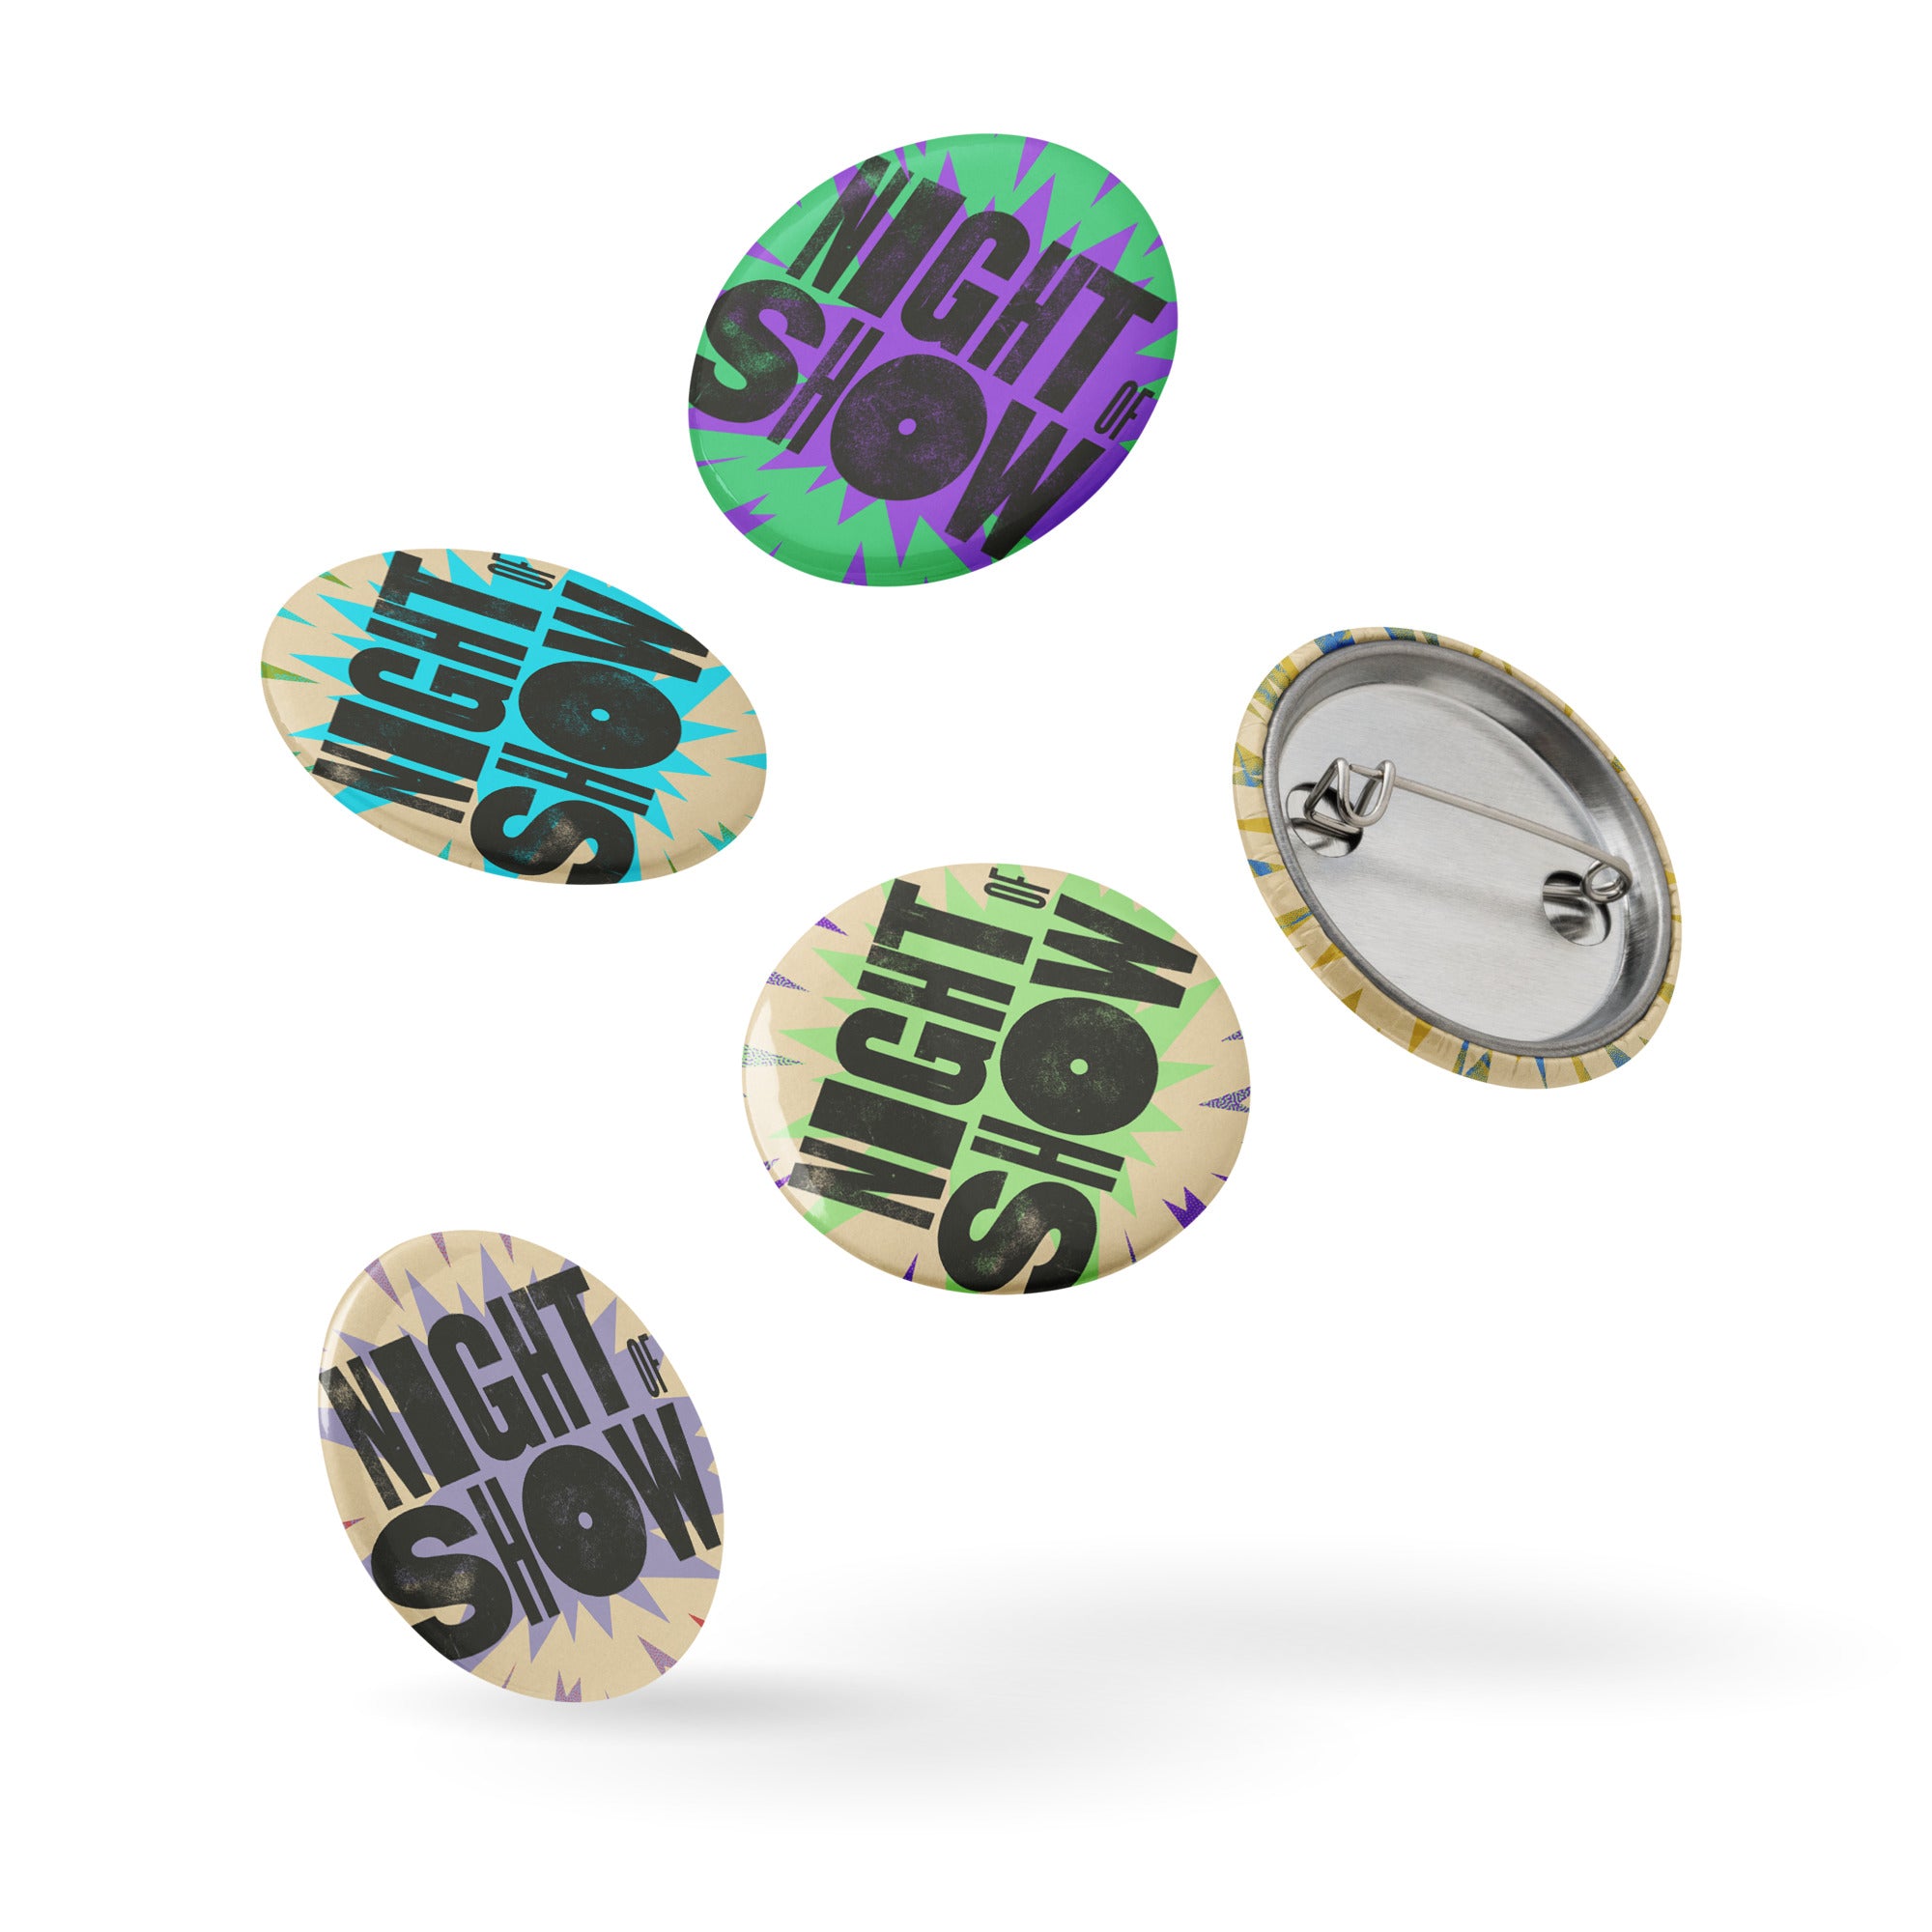 Night of Show Pin Buttons Set